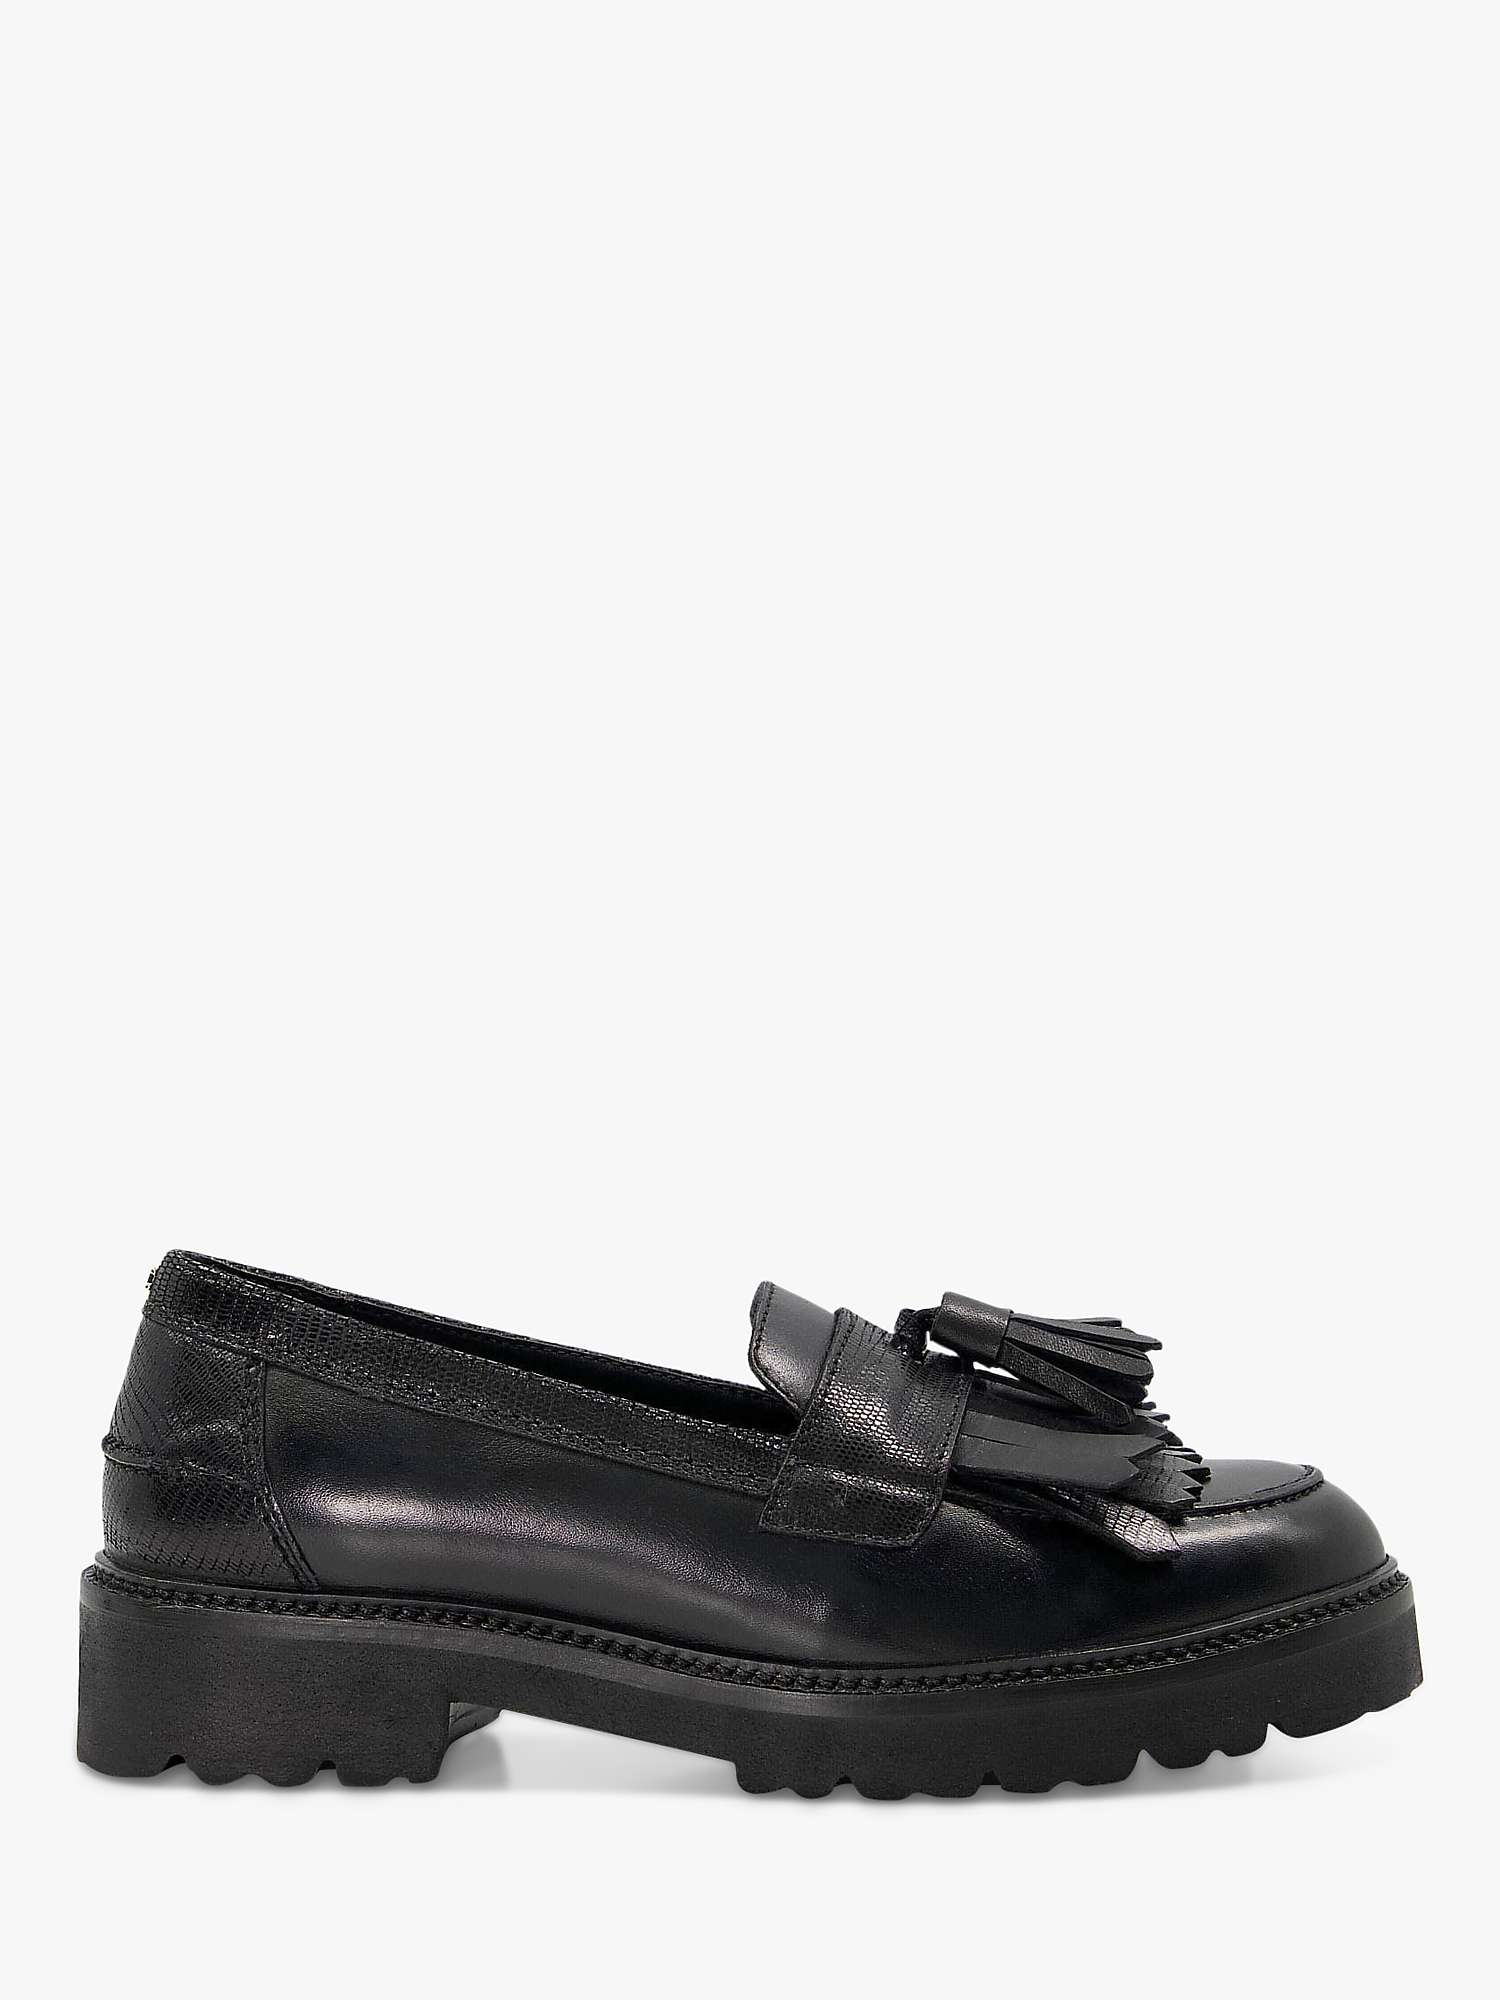 Buy Dune Guardian Leather Loafers Online at johnlewis.com